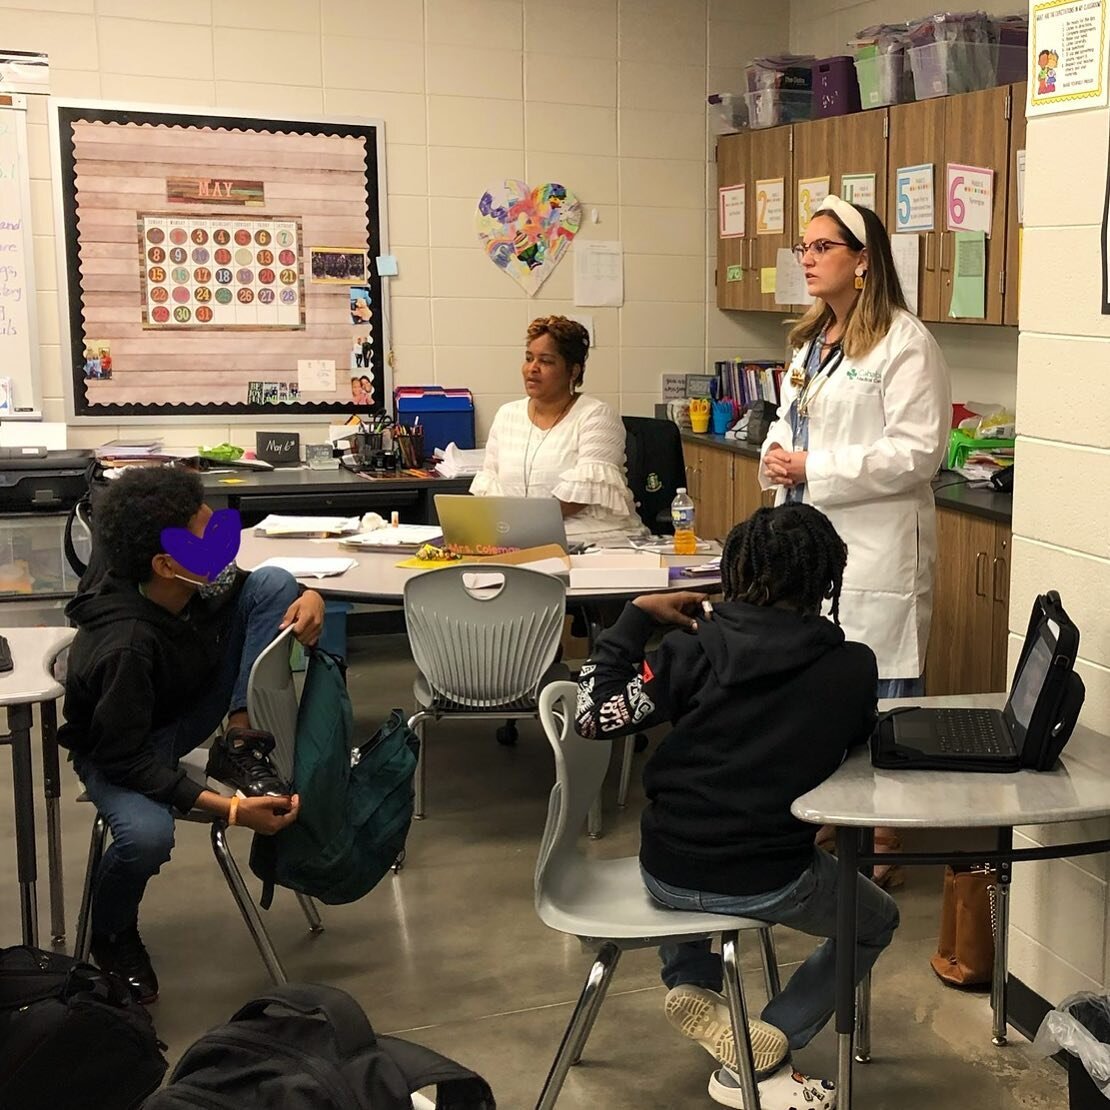 Our resident Katy talking to Students at a school about the career path to Nurse Practitioner! 

#npresidencyprogram #npresidency #npstudent #fnpstudent